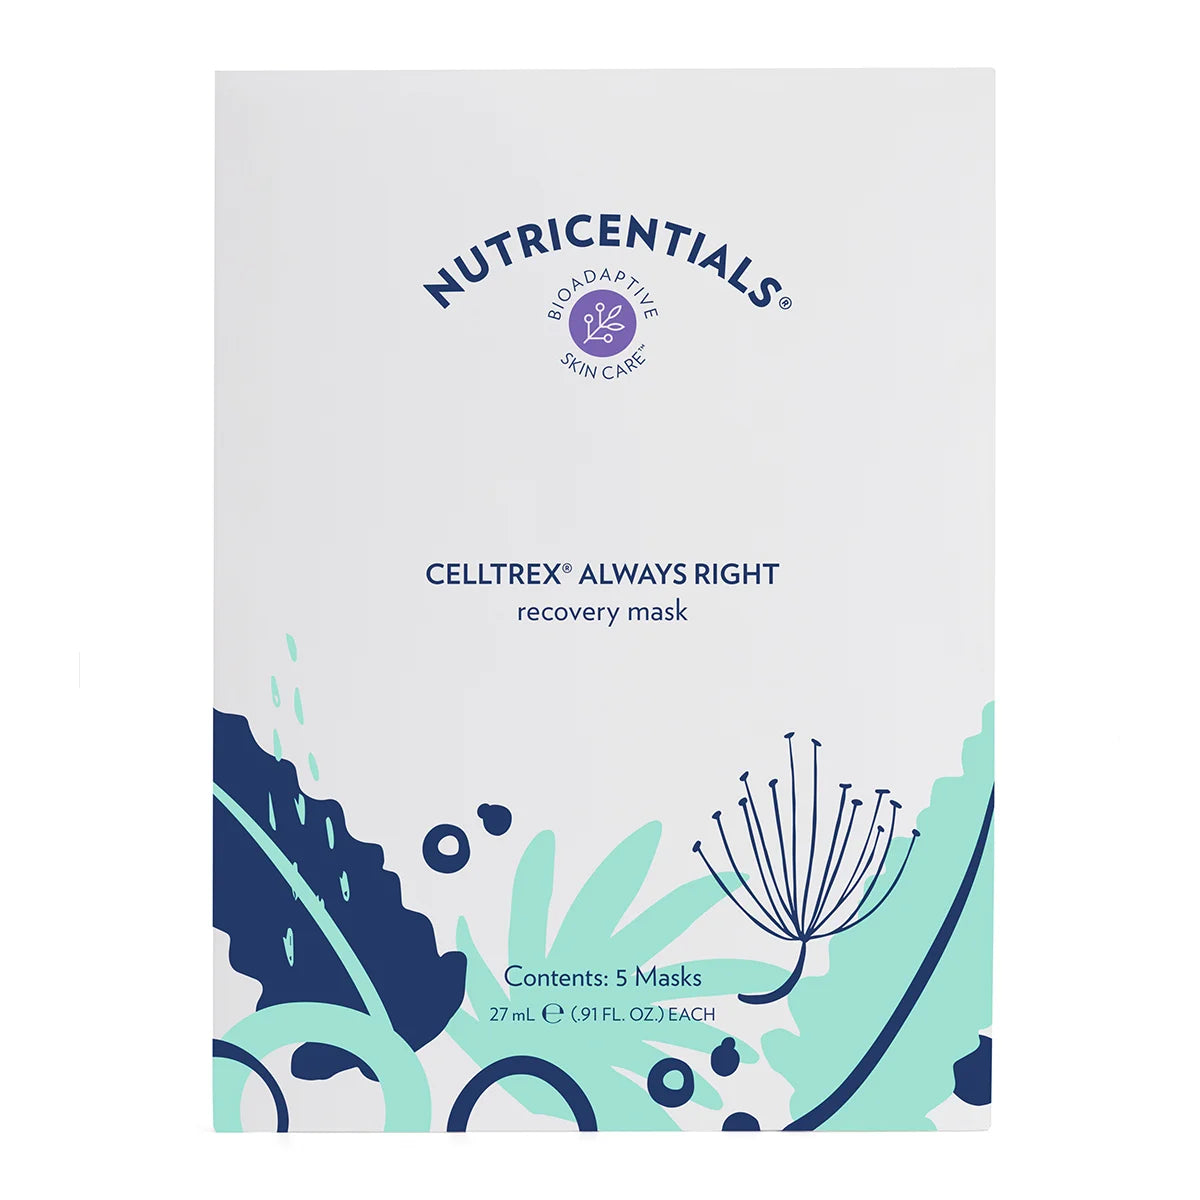 Nutricentials Bioadaptive Skin Care™ CelltrexBuy Celltrex Always Right Recovery Mask
* Discount will apply at checkout. 
Give your skin the relaxation and recharge it craves with Celltrex Always Right Recovery Nutricentials Bioadaptive Skin Care™ Celltrex Always Right Recovery Ma